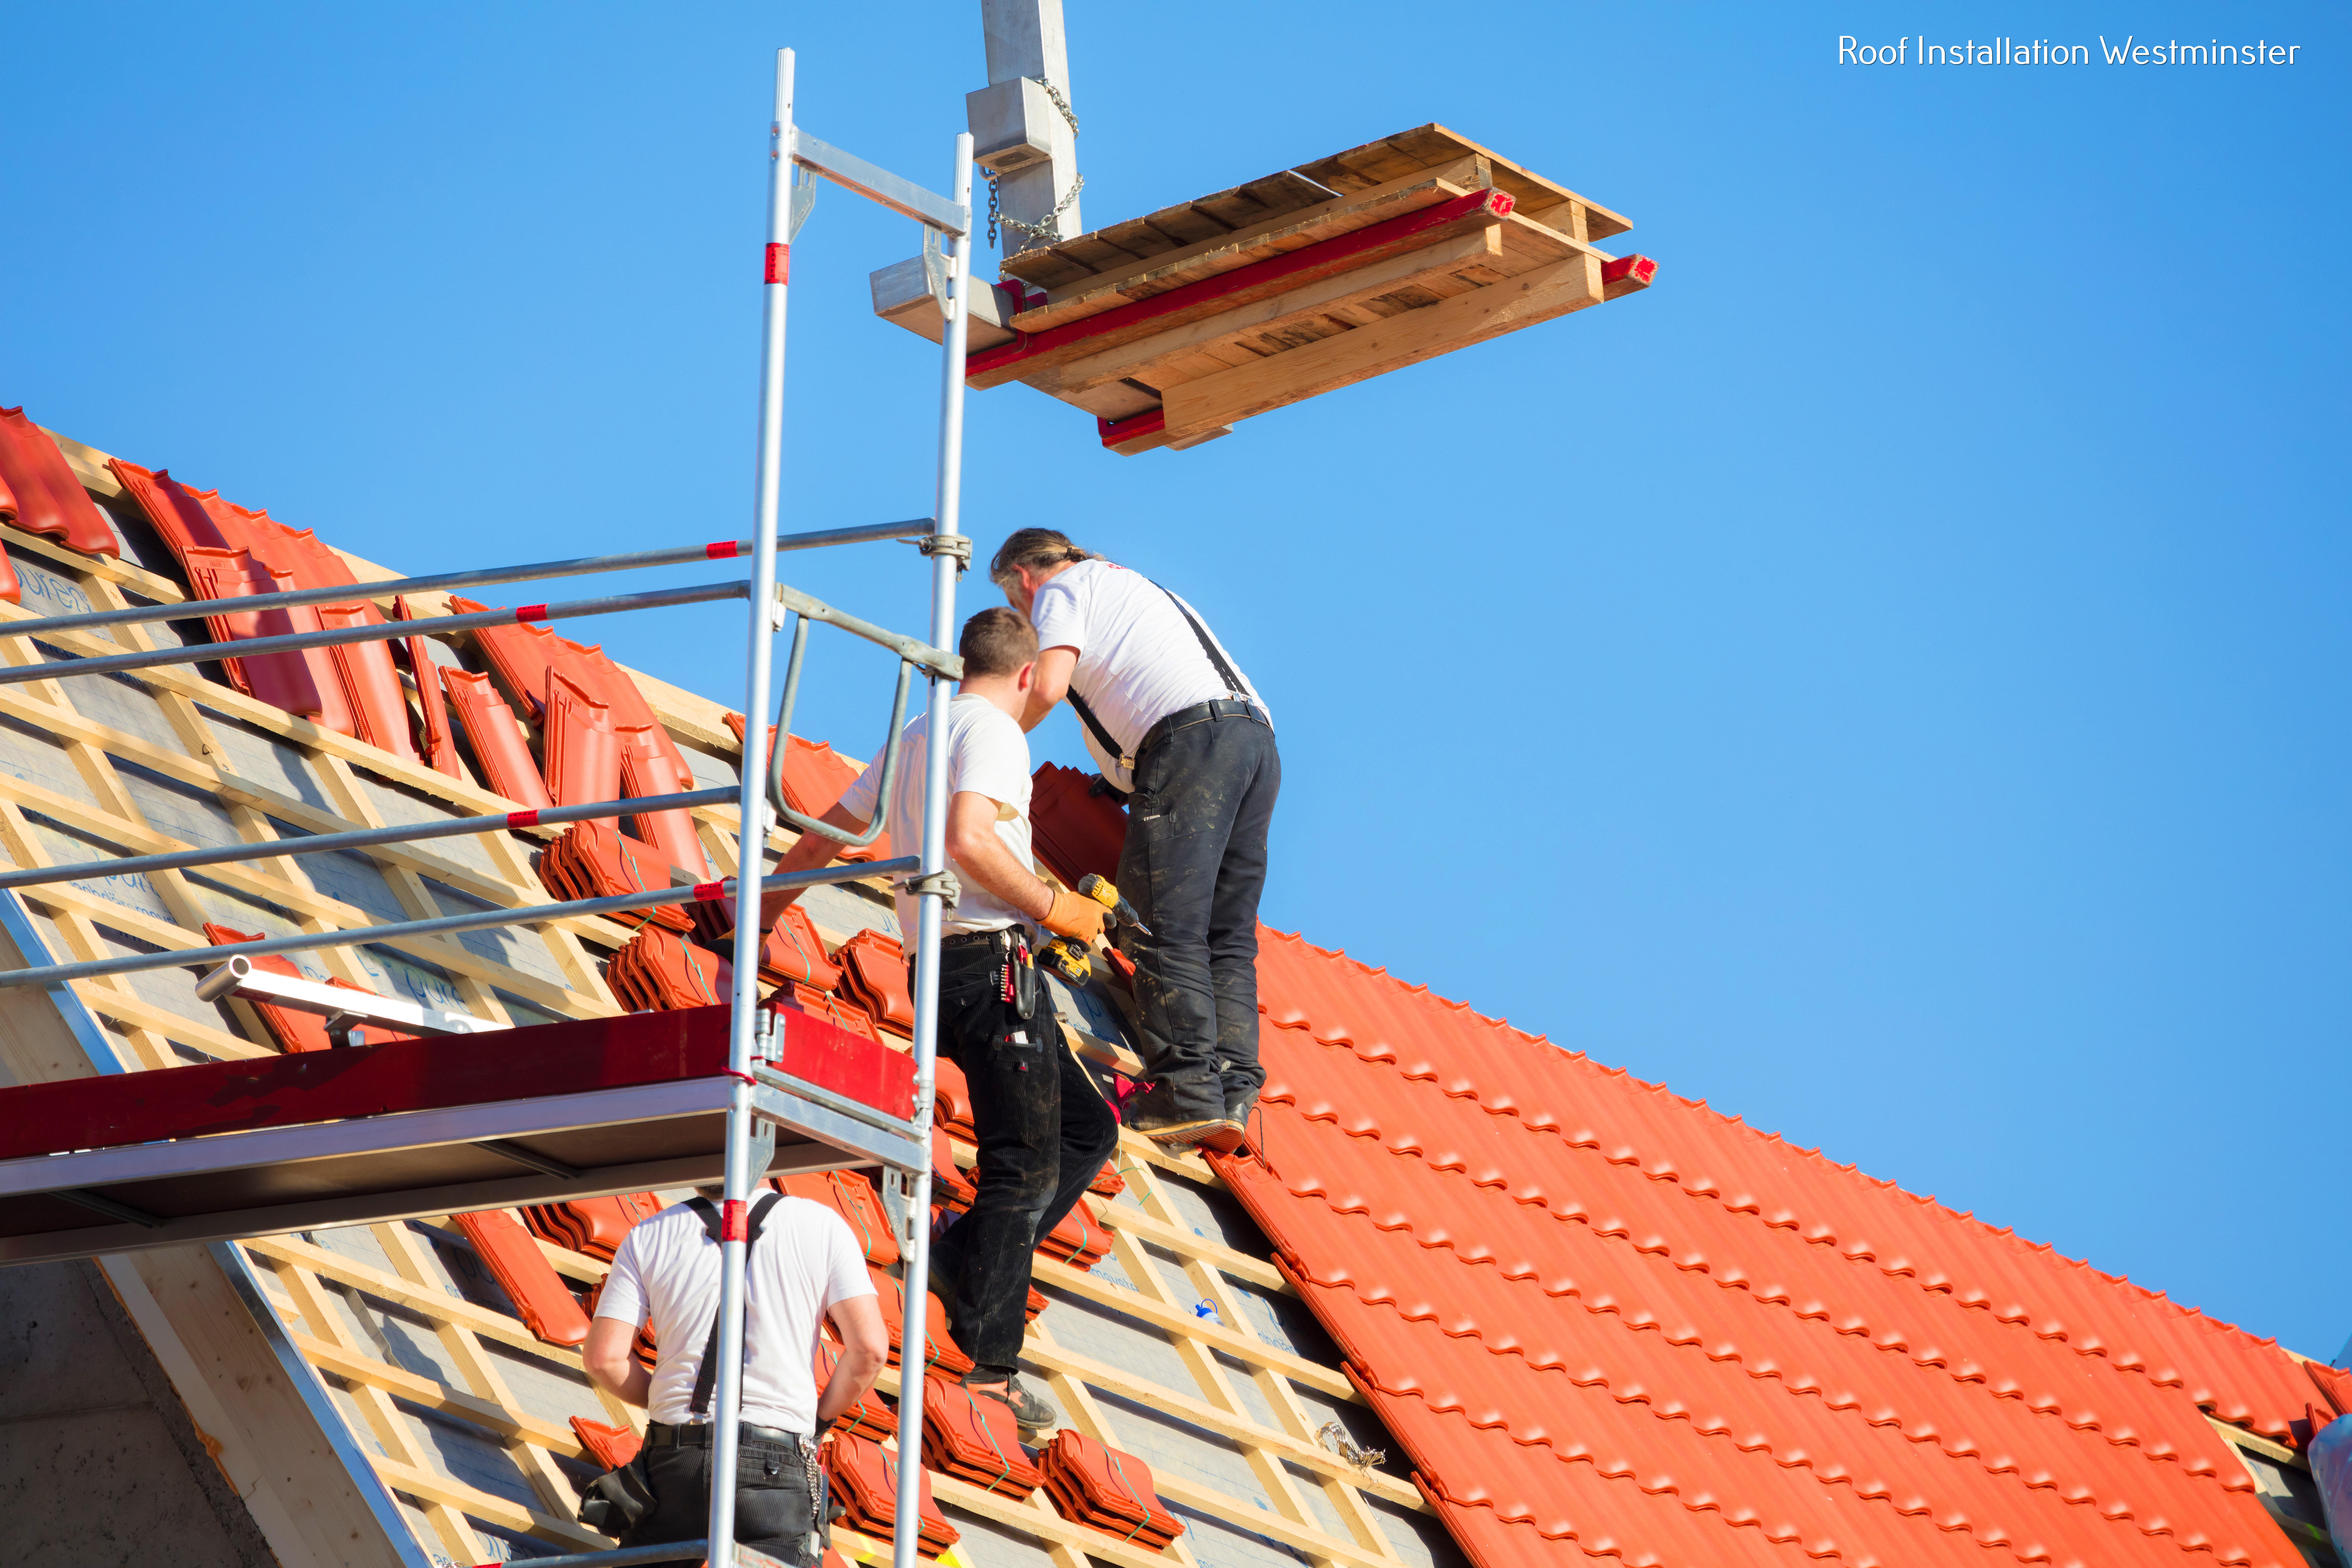 Affordable Roofing & Construction LLC - Westminster Roofing Contractor Outlines the Benefits of Hiring a Local Roofing Contractor